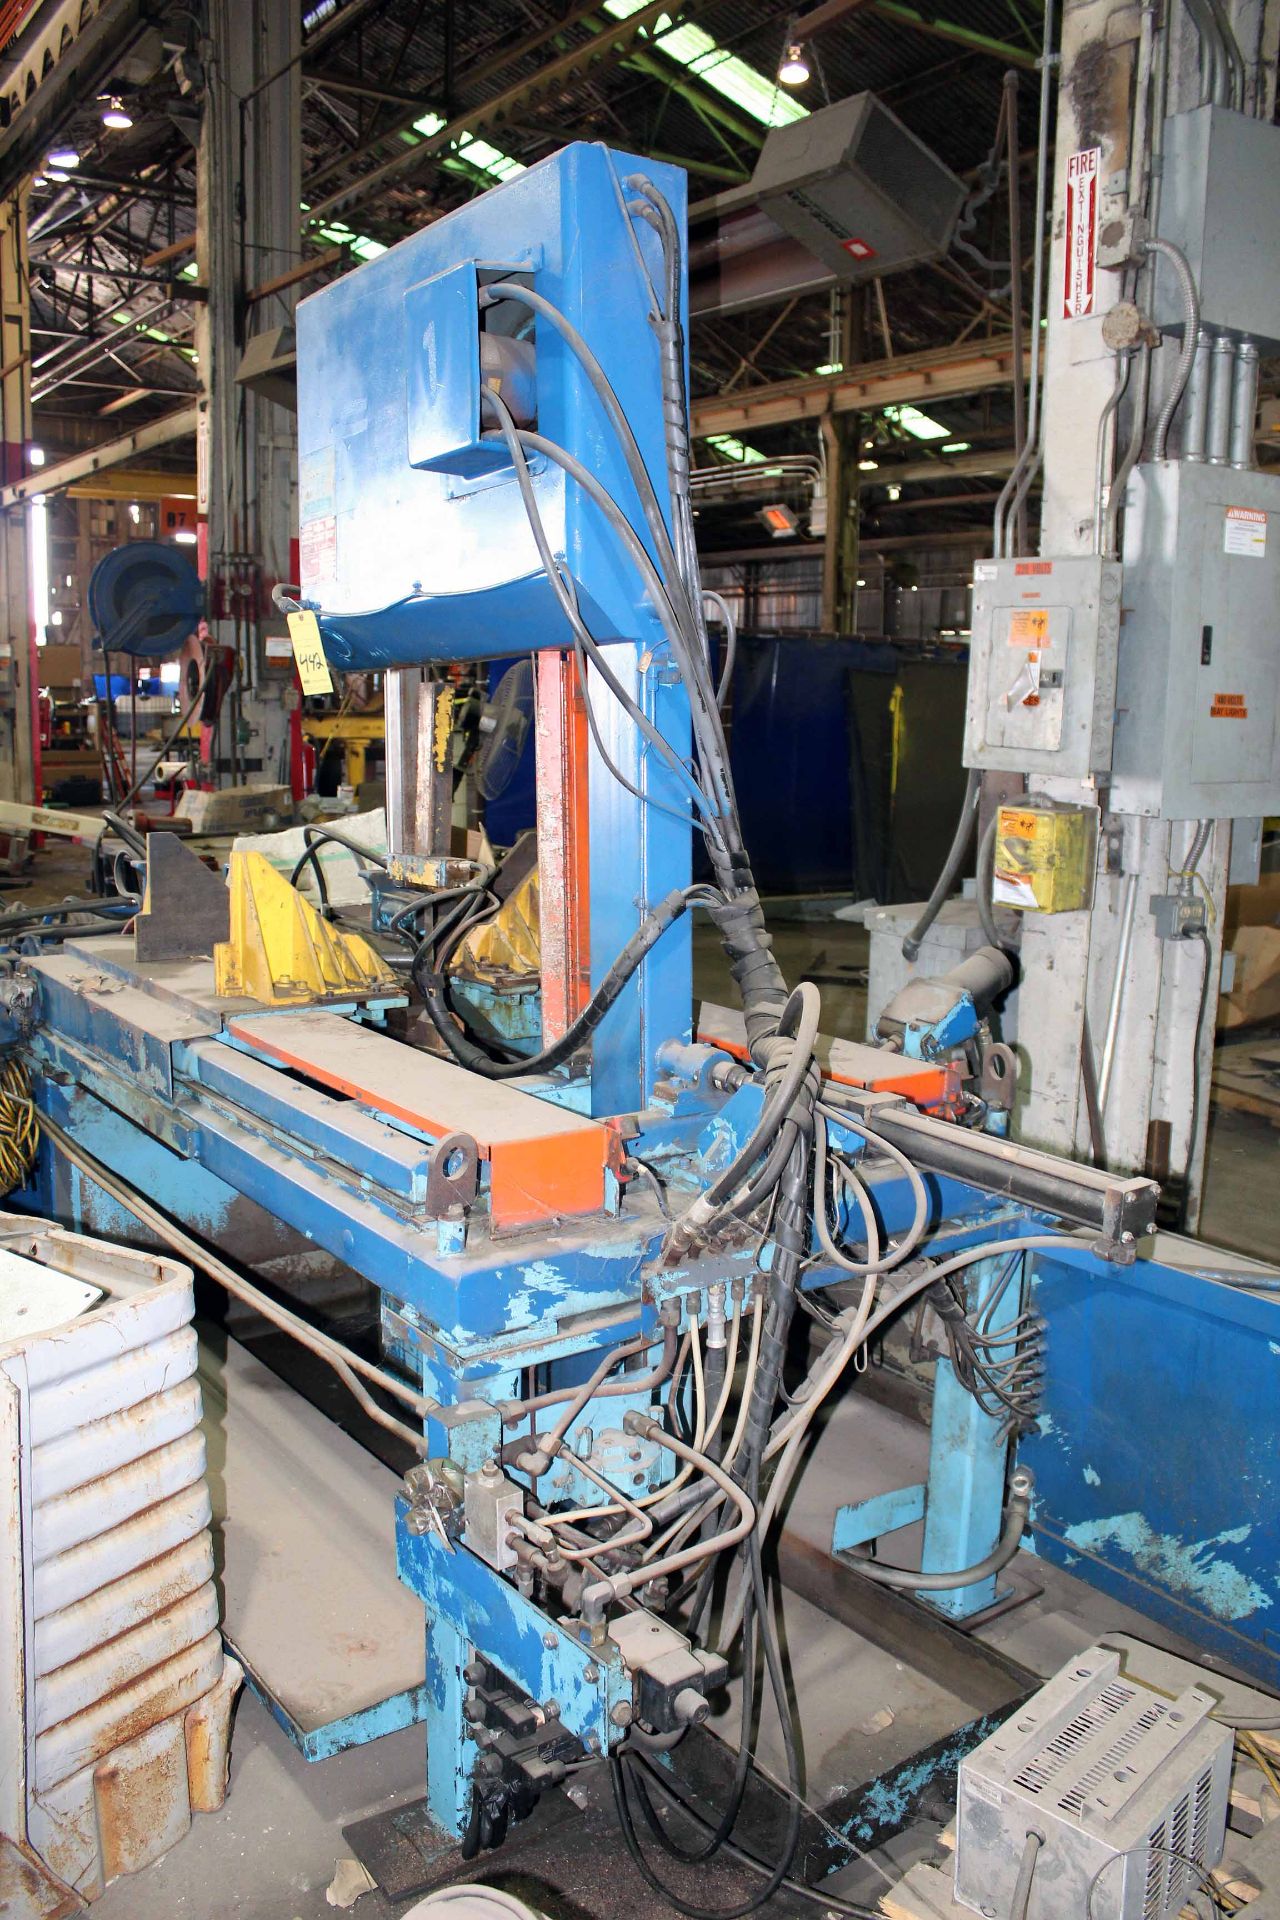 VERTICAL BANDSAW, DOALL MDL. TF-2021M, 480 v., 3 phase, 192" band length, hyd. clamping, hyd. pwr. - Image 2 of 7